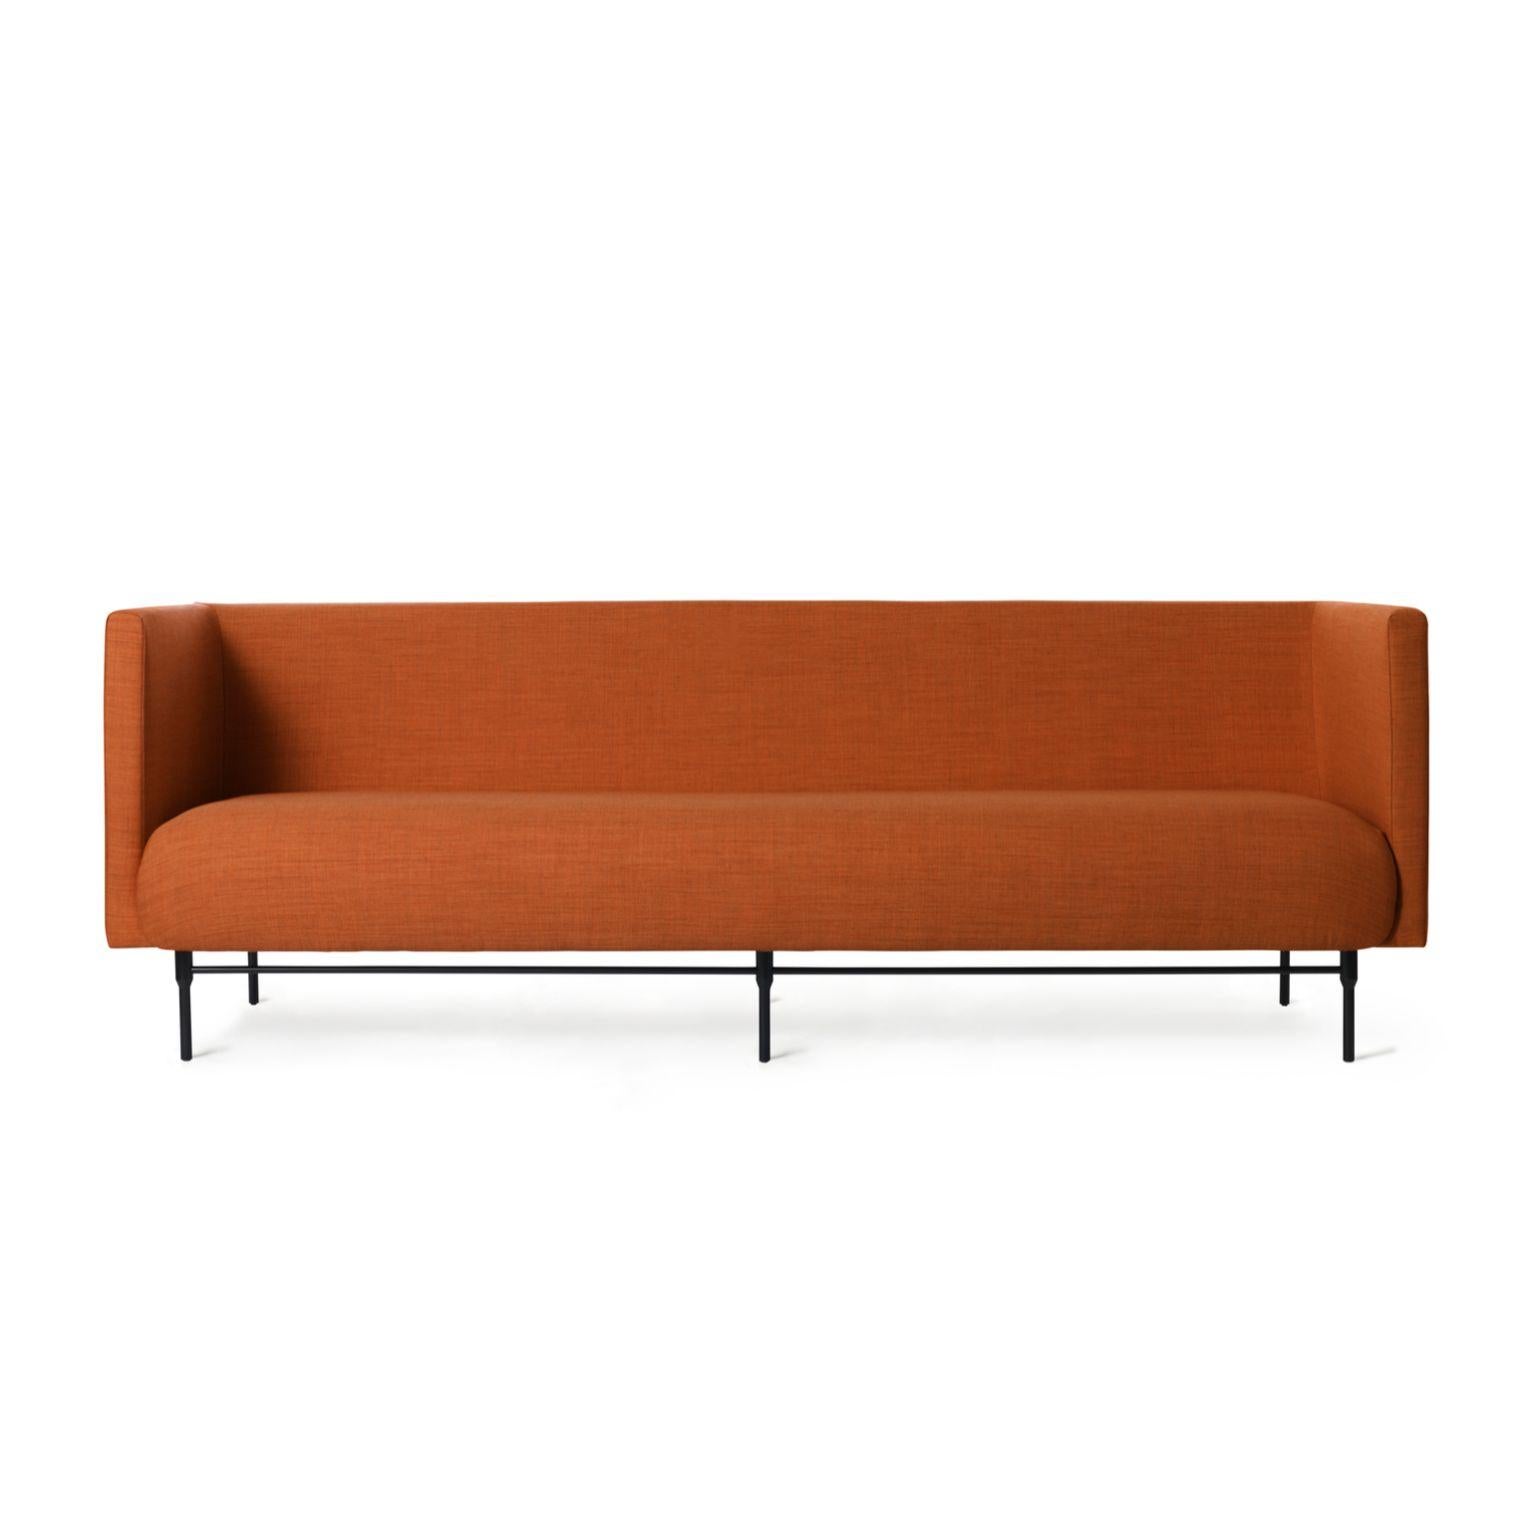 Galore 3 seater burnt orange by Warm Nordic
Dimensions: D 222 x W 83 x H 76 cm
Material: Textile upholstery, Powder coated black steel legs, Wooden frame, foam, spring system.
Weight: 62 kg
Also available in different colours and